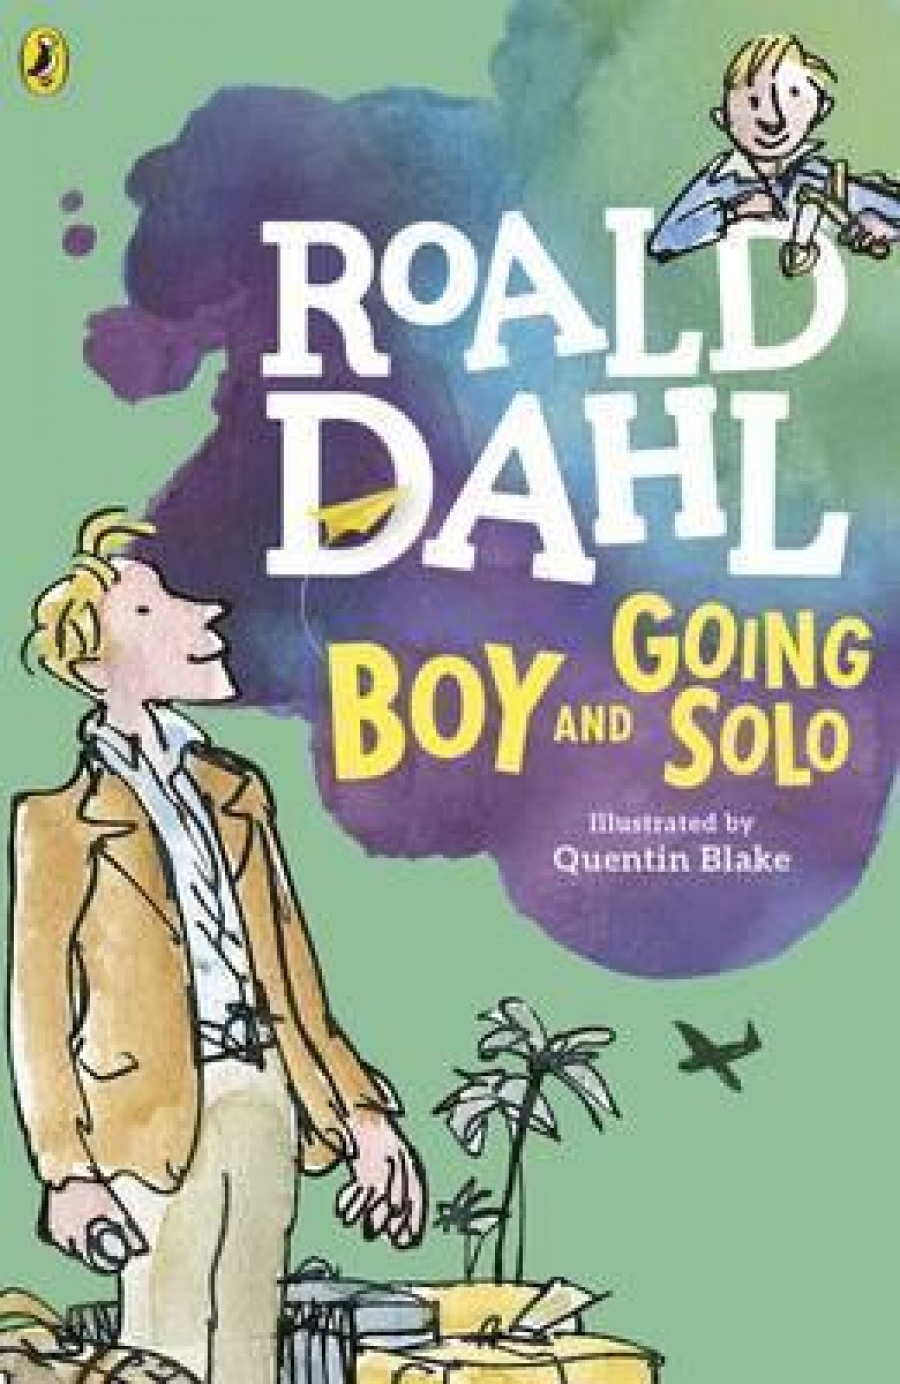 Roald Dahl Boy and Going Solo 